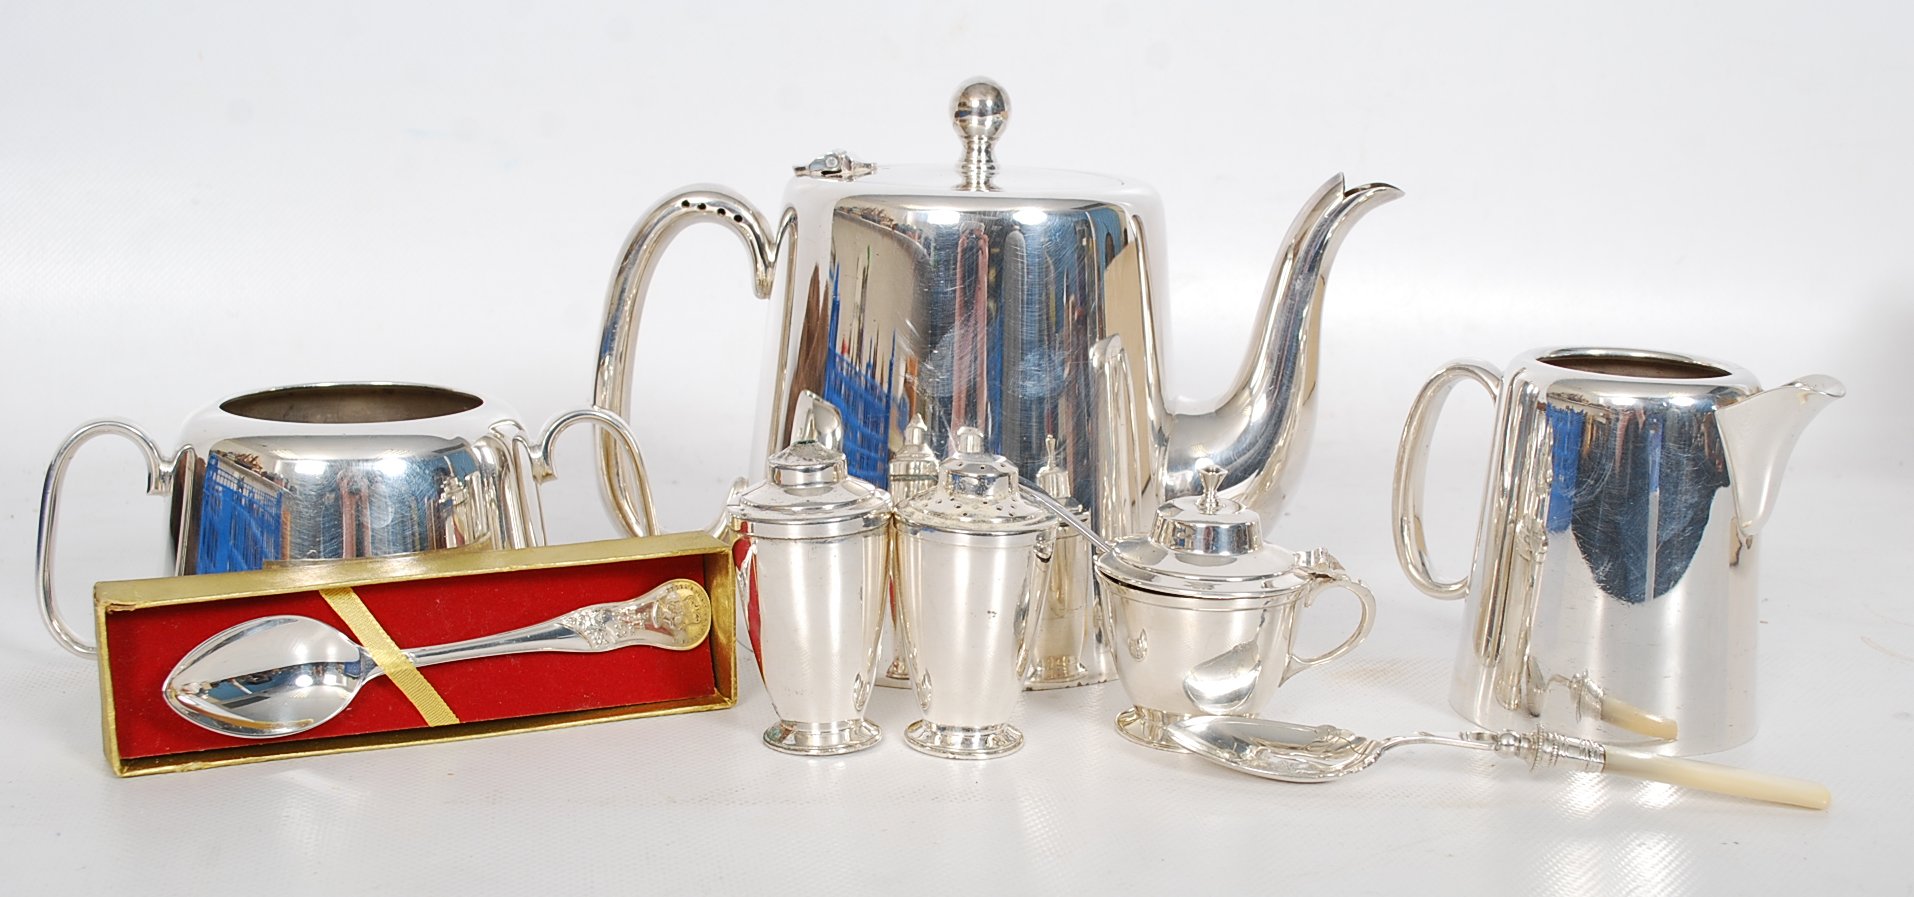 A good quality silver plate teapot together with the matching creamer and sugar bowl along with a